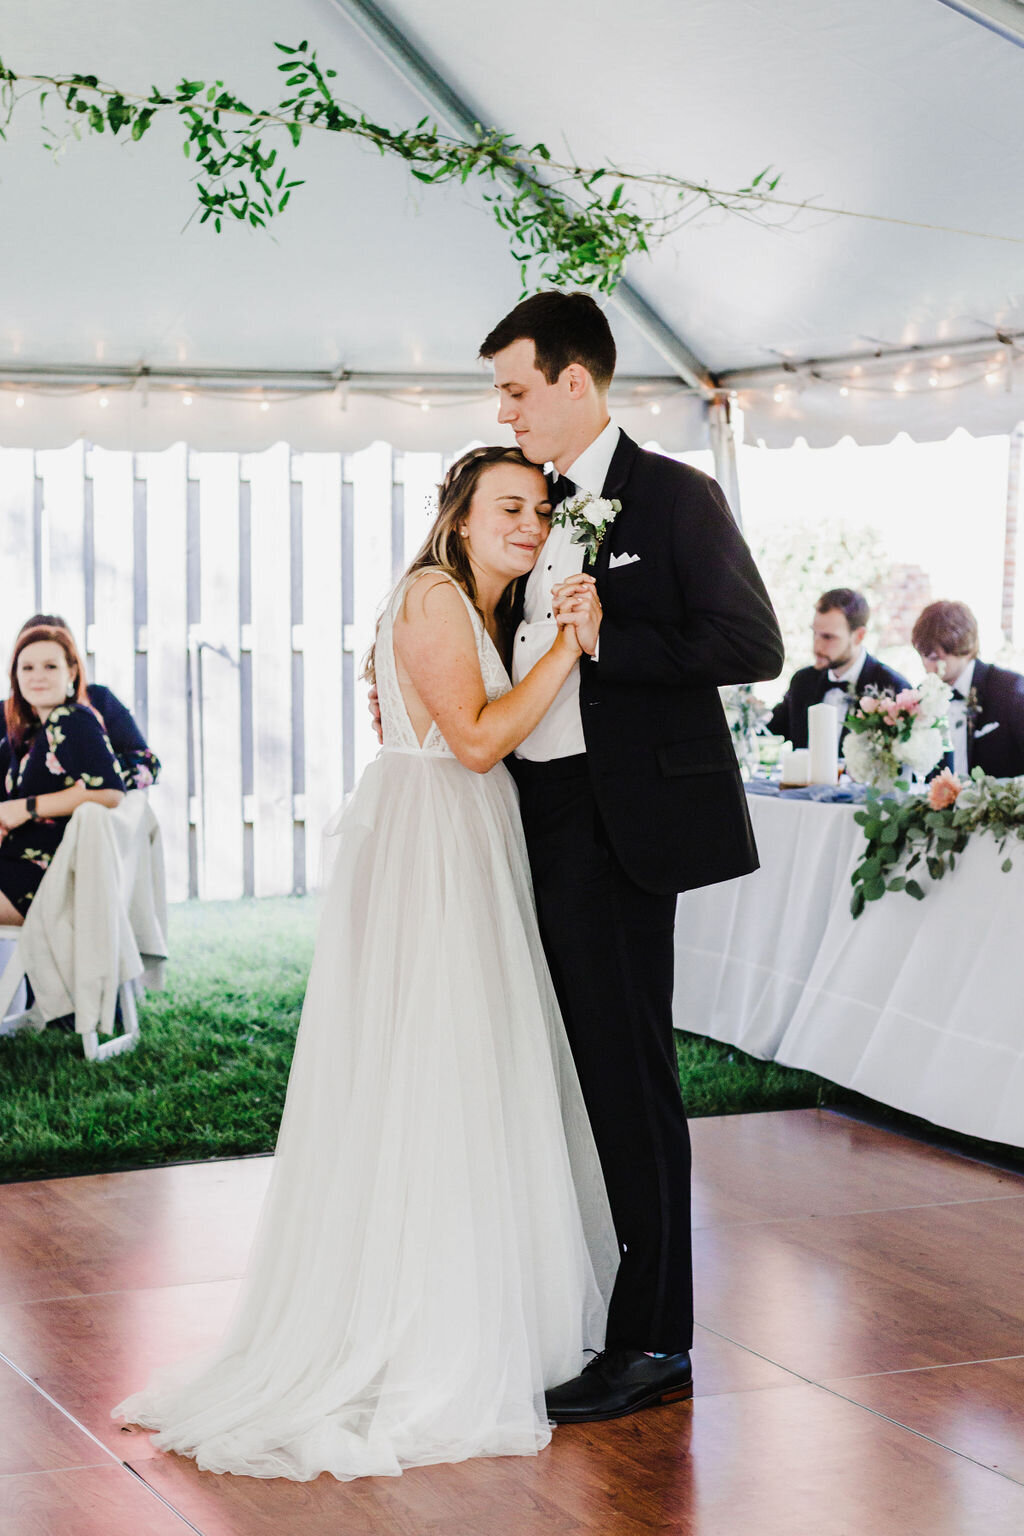 First dance in a tent